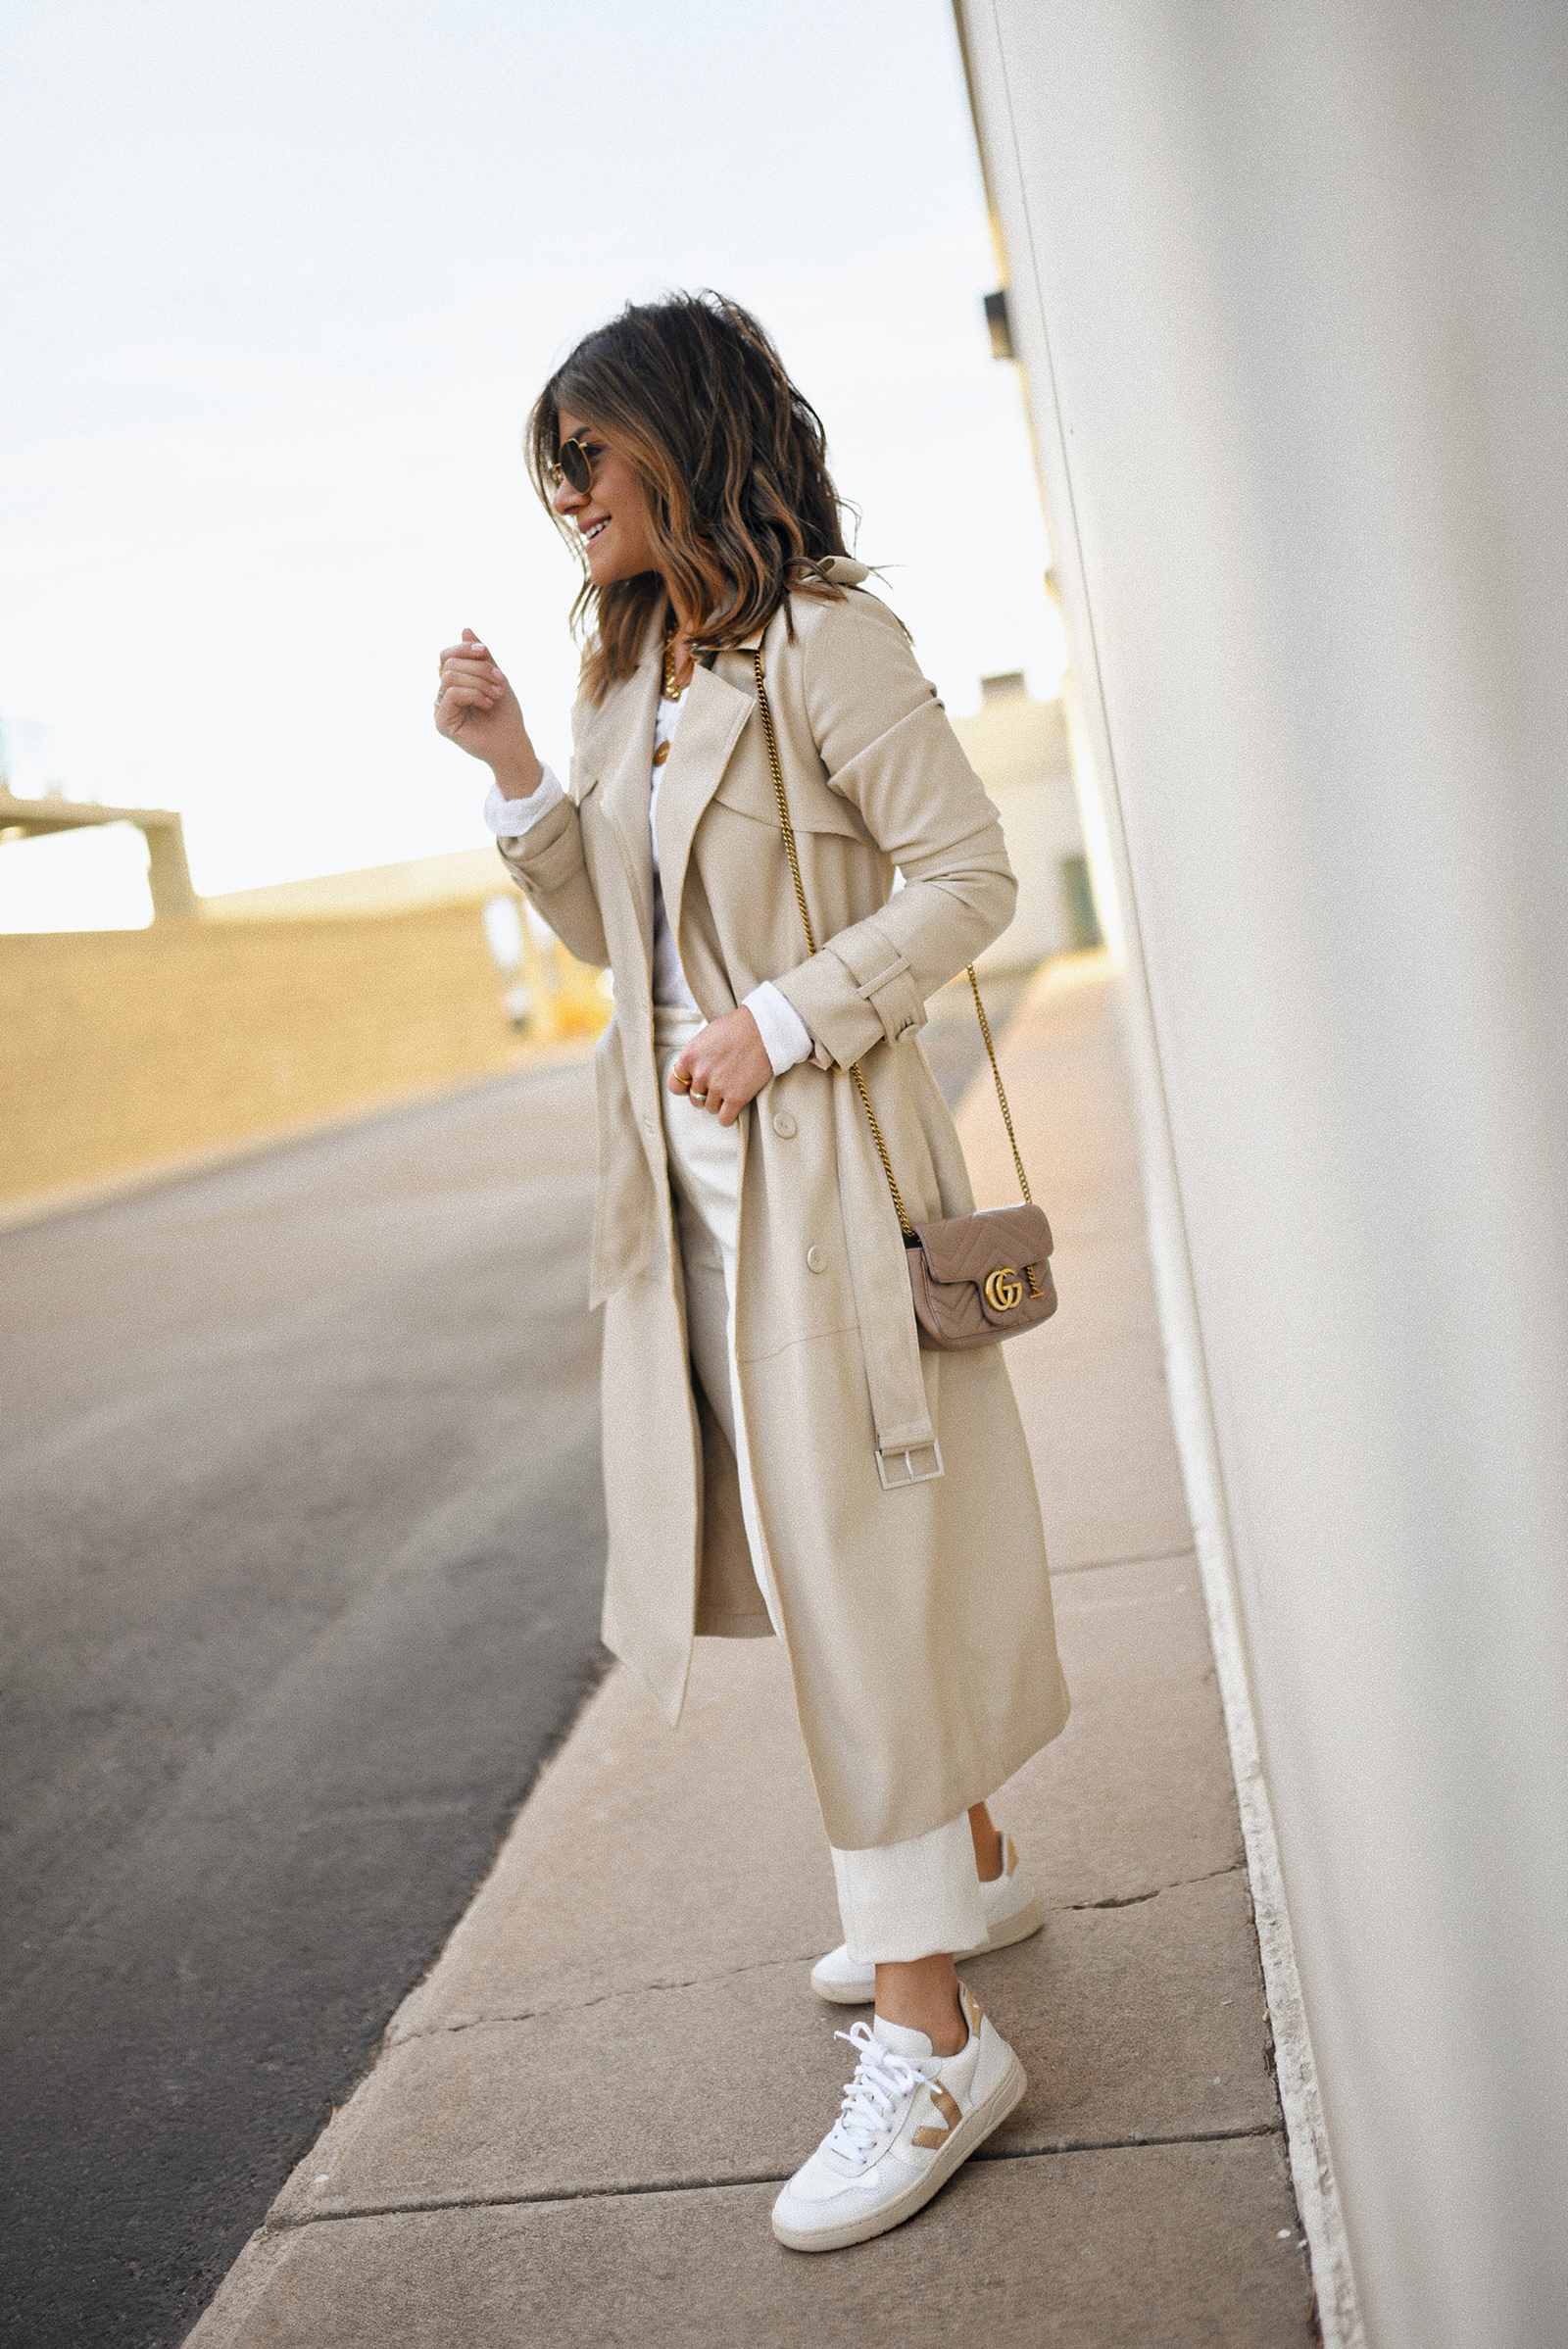 Carolina Hellal of Chic Talk wearing a Karen Millen faux leather trench coat, Michael Stars long sleeve white top, Uniqlo beige trousers and Veja sneakers. 